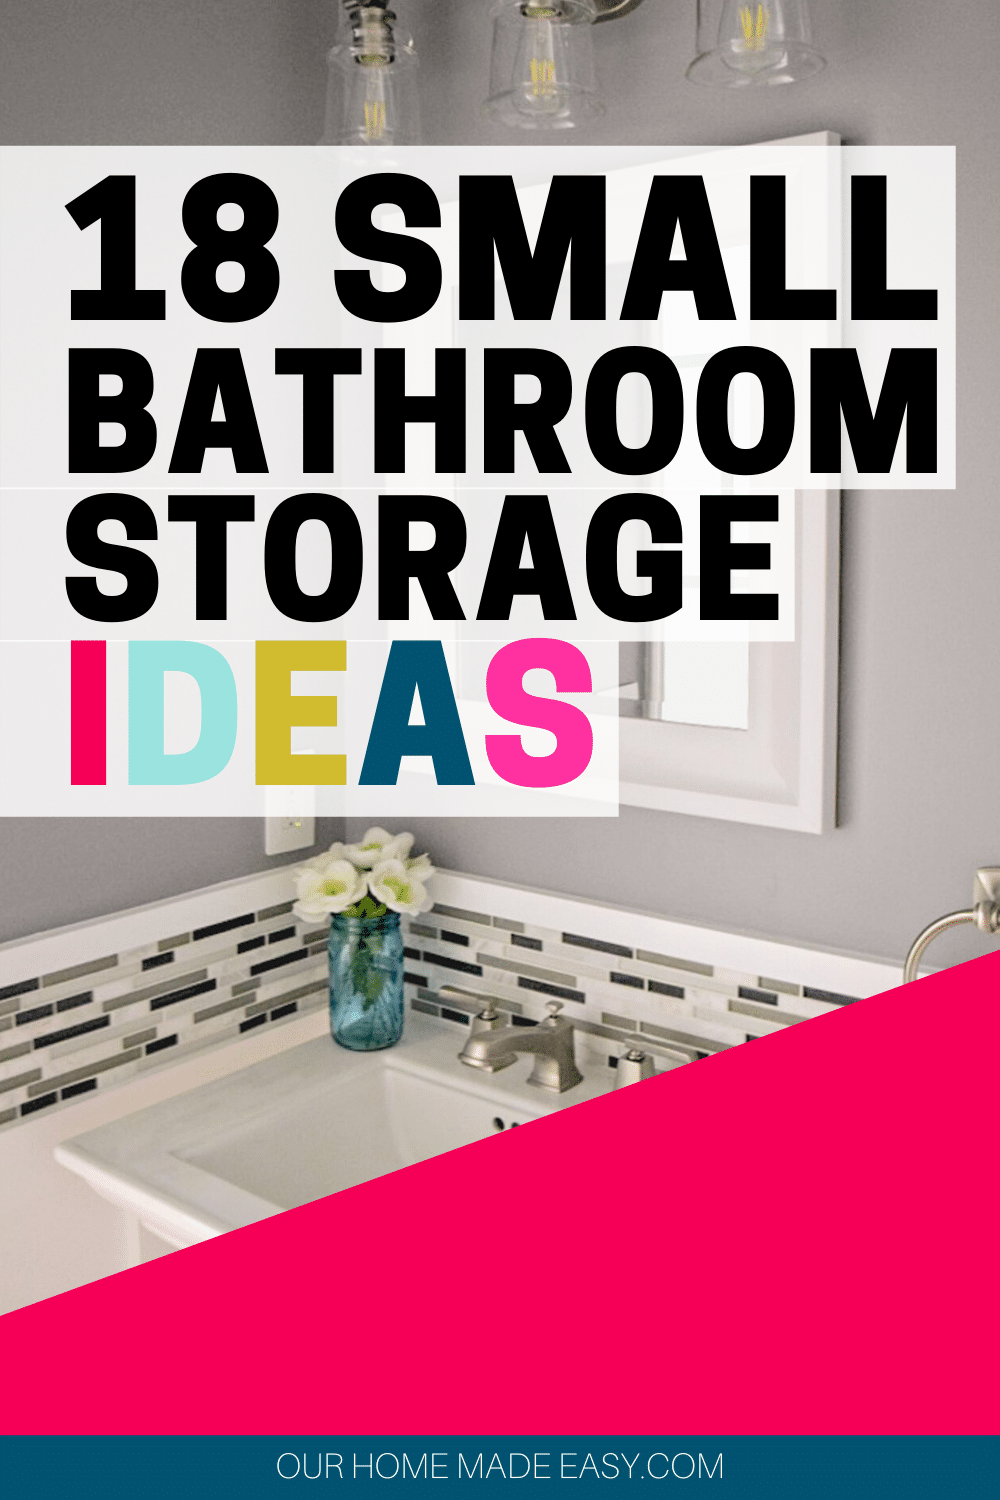 Need storage in the bathroom?